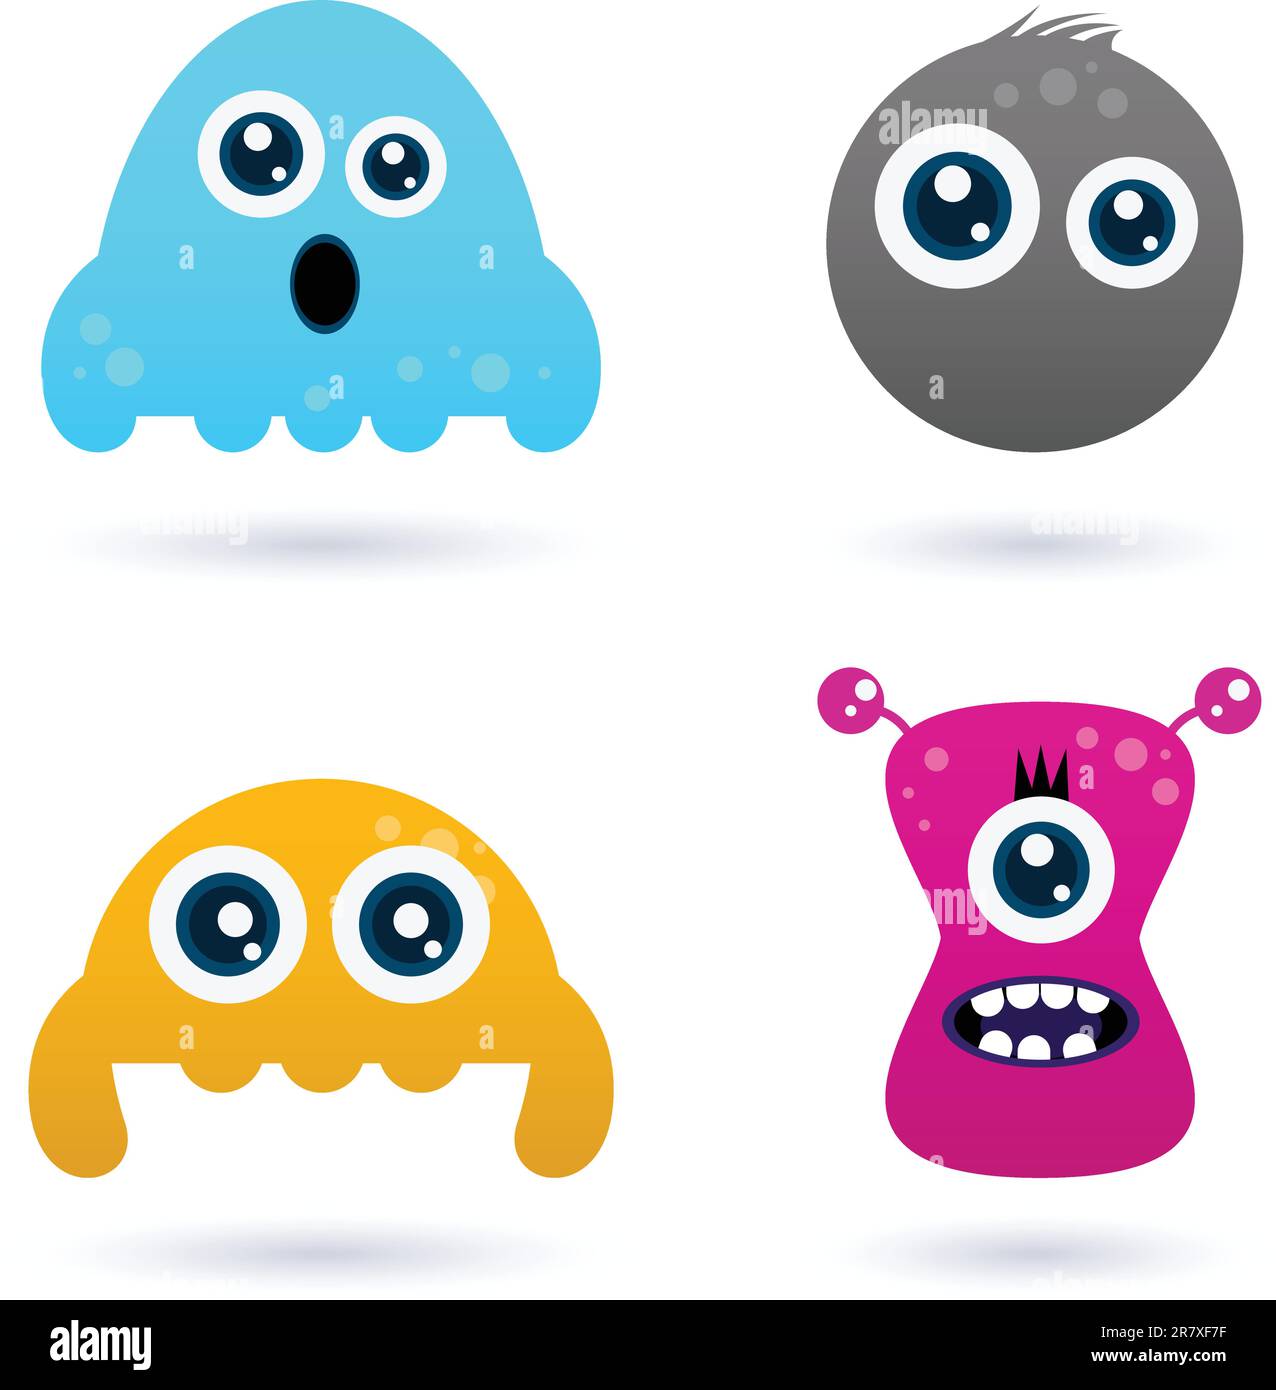 Cute monster or germs characters collection. Vector cartoon Illustration Stock Vector